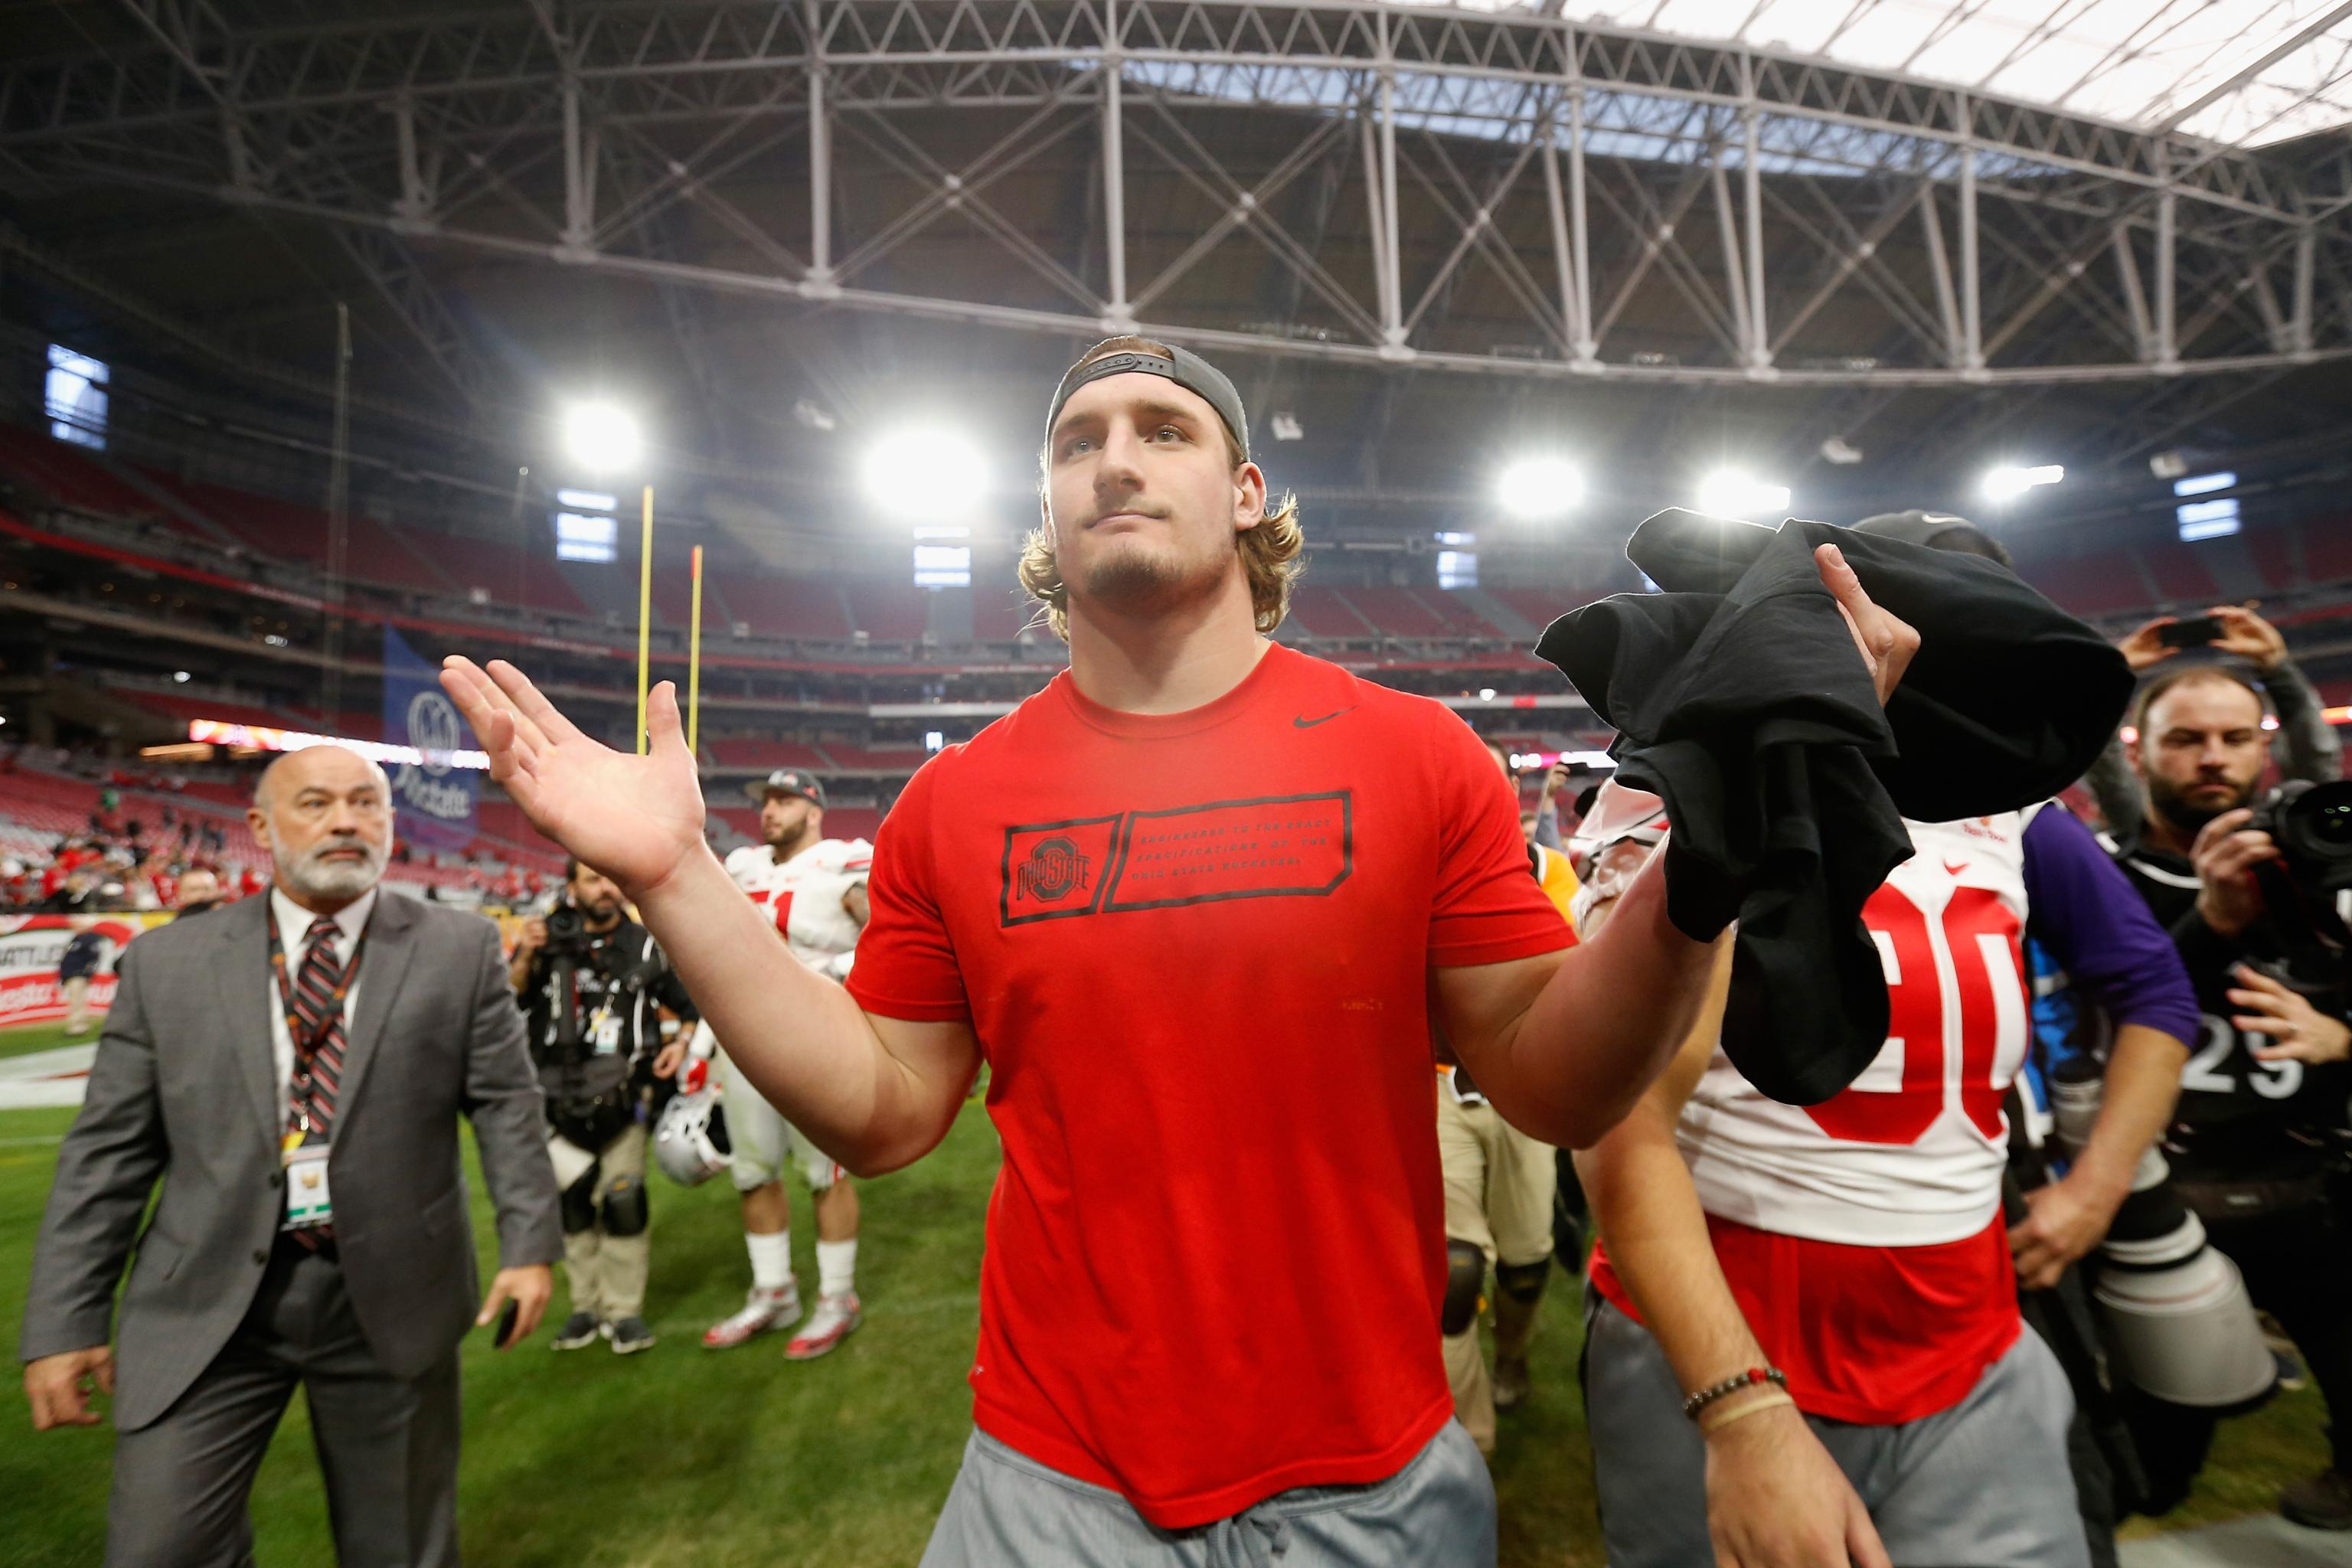 Ejected: Ohio State loses Joey Bosa 1st quarter, tweets apology